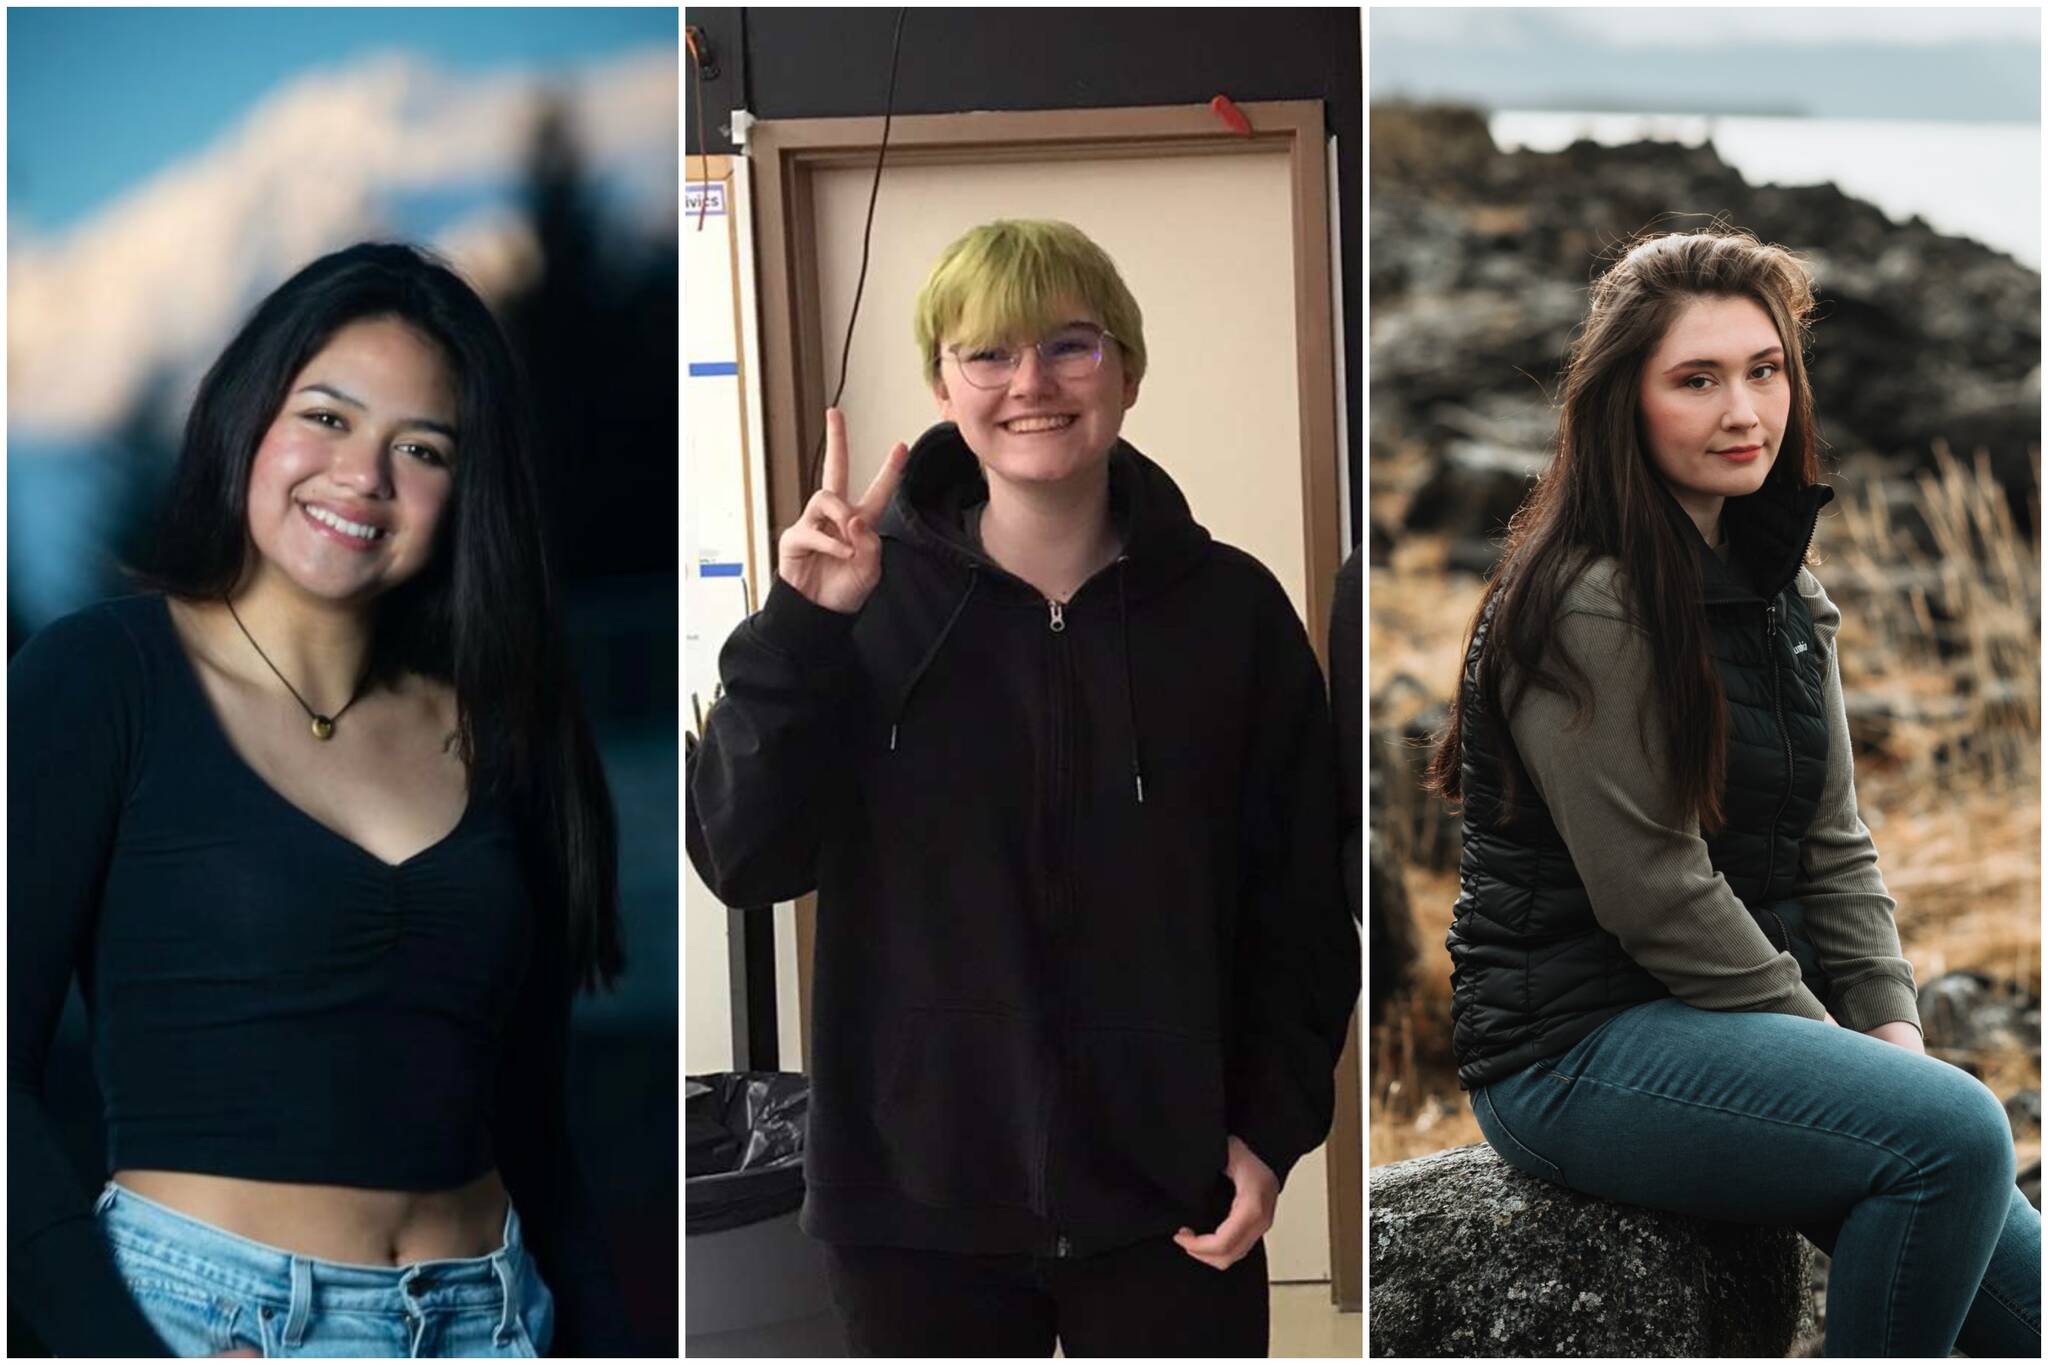 Courtesy Photos 
Sophia Pugh, left, Eden Denton, center, and Rileyanne Payne, right, seniors from Juneau’s three high schools are about to graduate as their time in high school comes to a close.
Sophia Pugh, left, Eden Denton, center, and Rileyanne Payne, right, seniors from Juneau’s three high schools are about to graduate as their time in high school comes to a close. (Courtesy Photos)